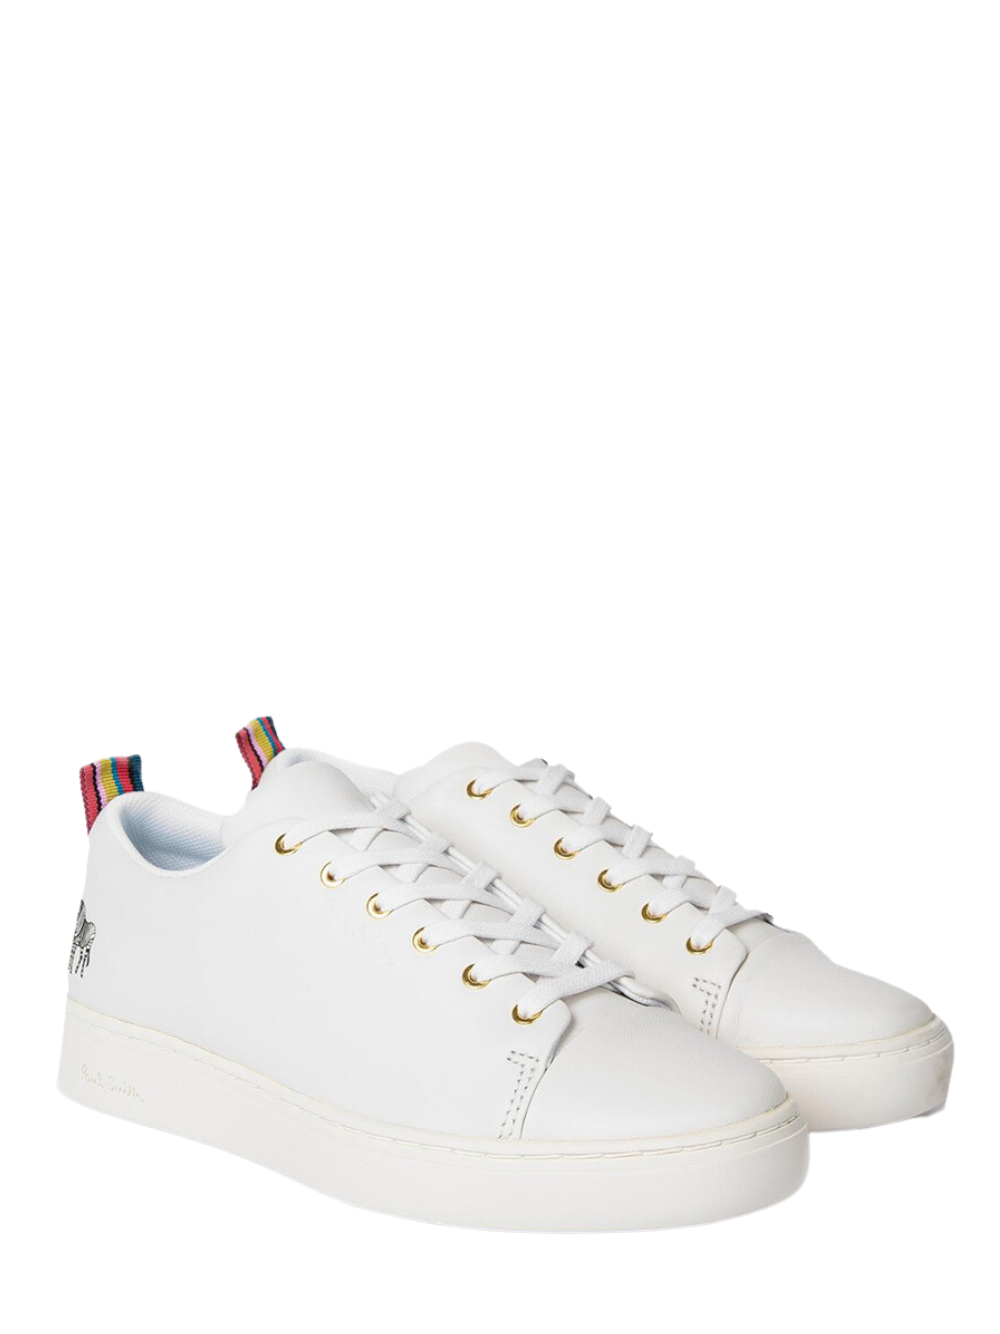 Paul Smith Women Leather 'Lee' Sneakers (White) 1